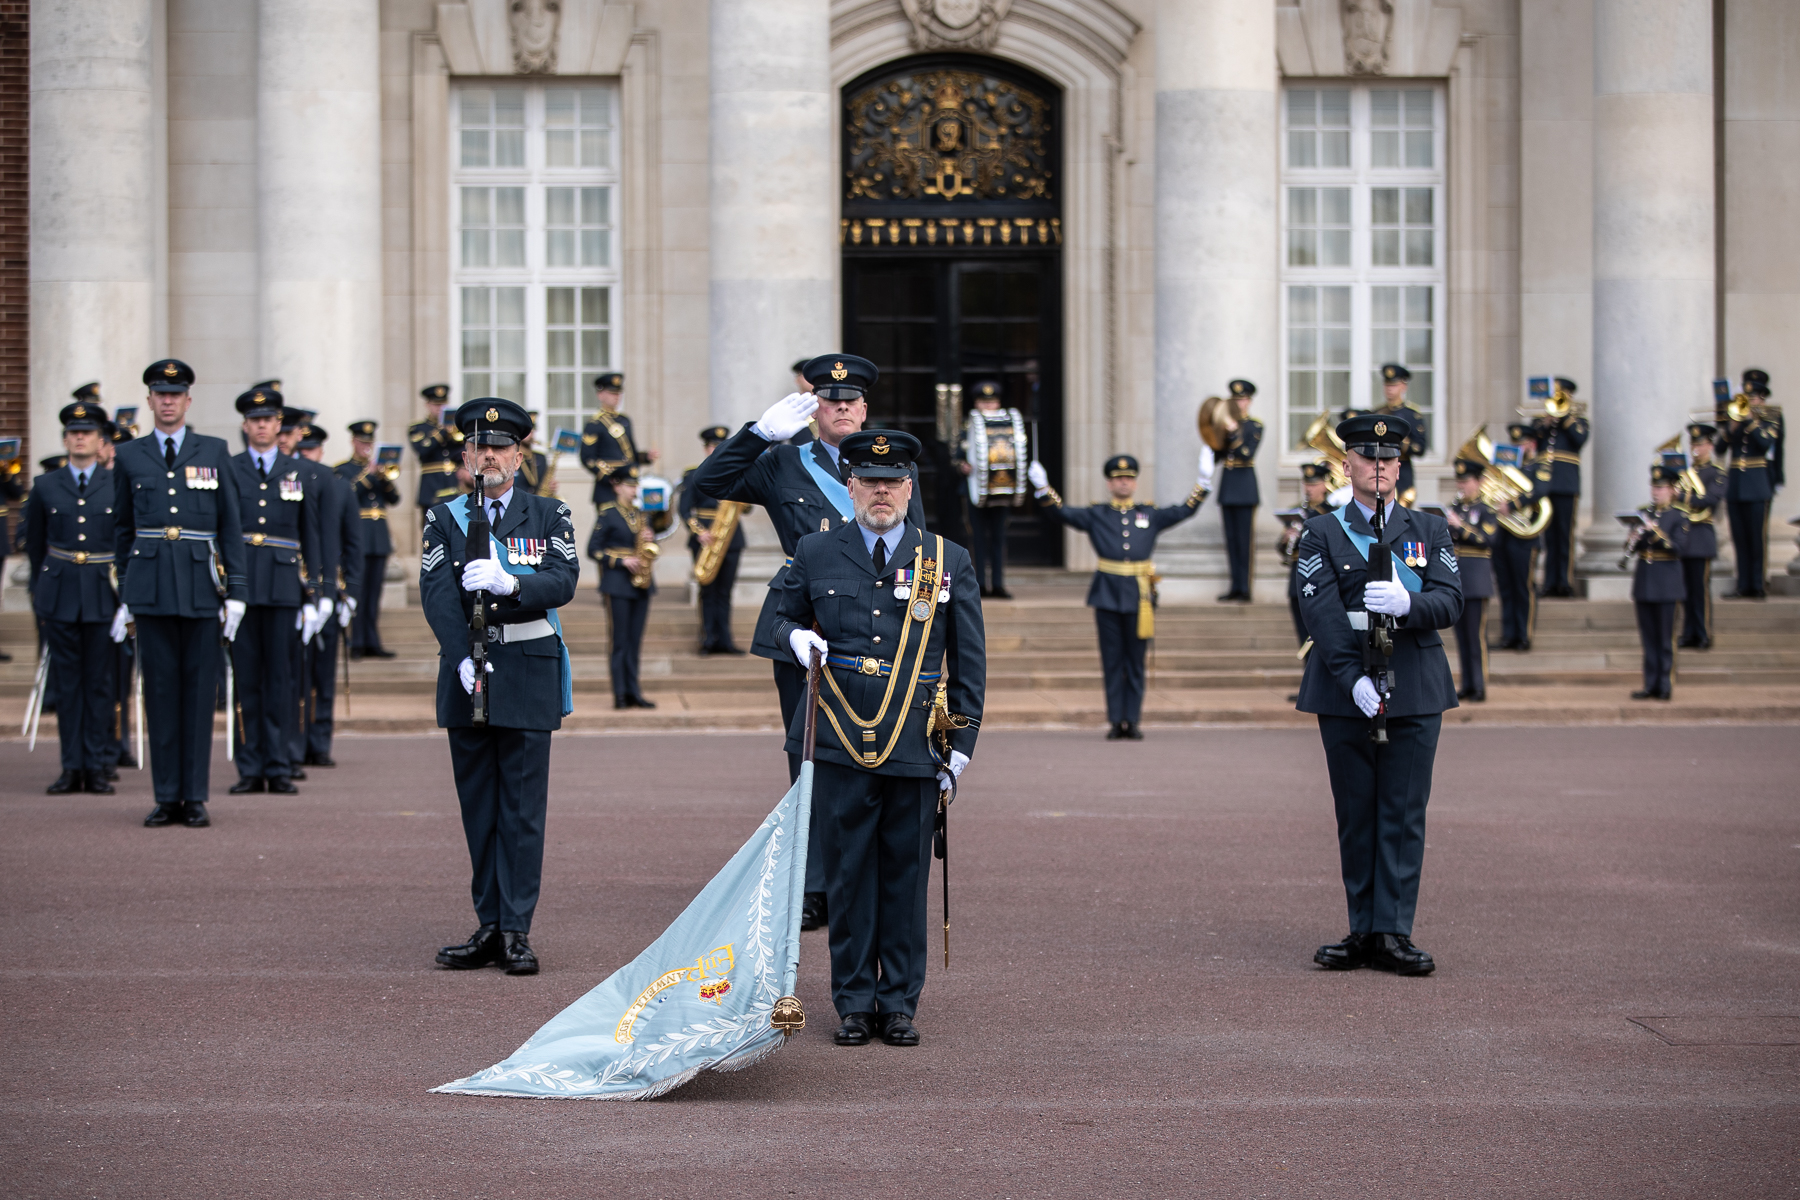 Personnel in parade with Colour Flag.